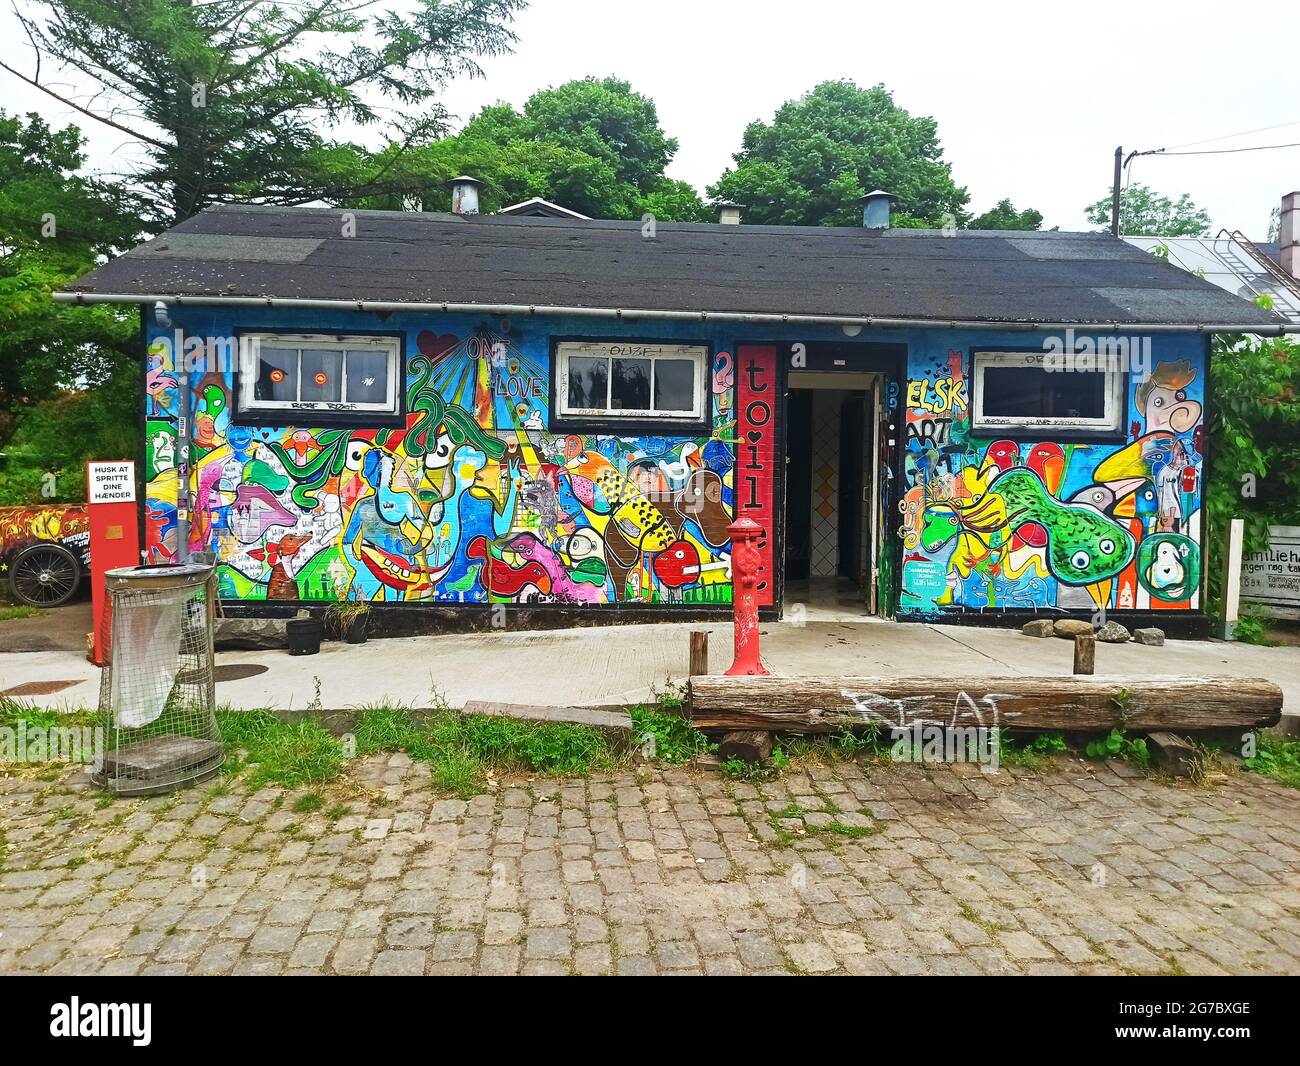 Copenhagen, Denmark - July 2021: Colorful graffiti wall of a public toilet building in Freetown Christiania Stock Photo